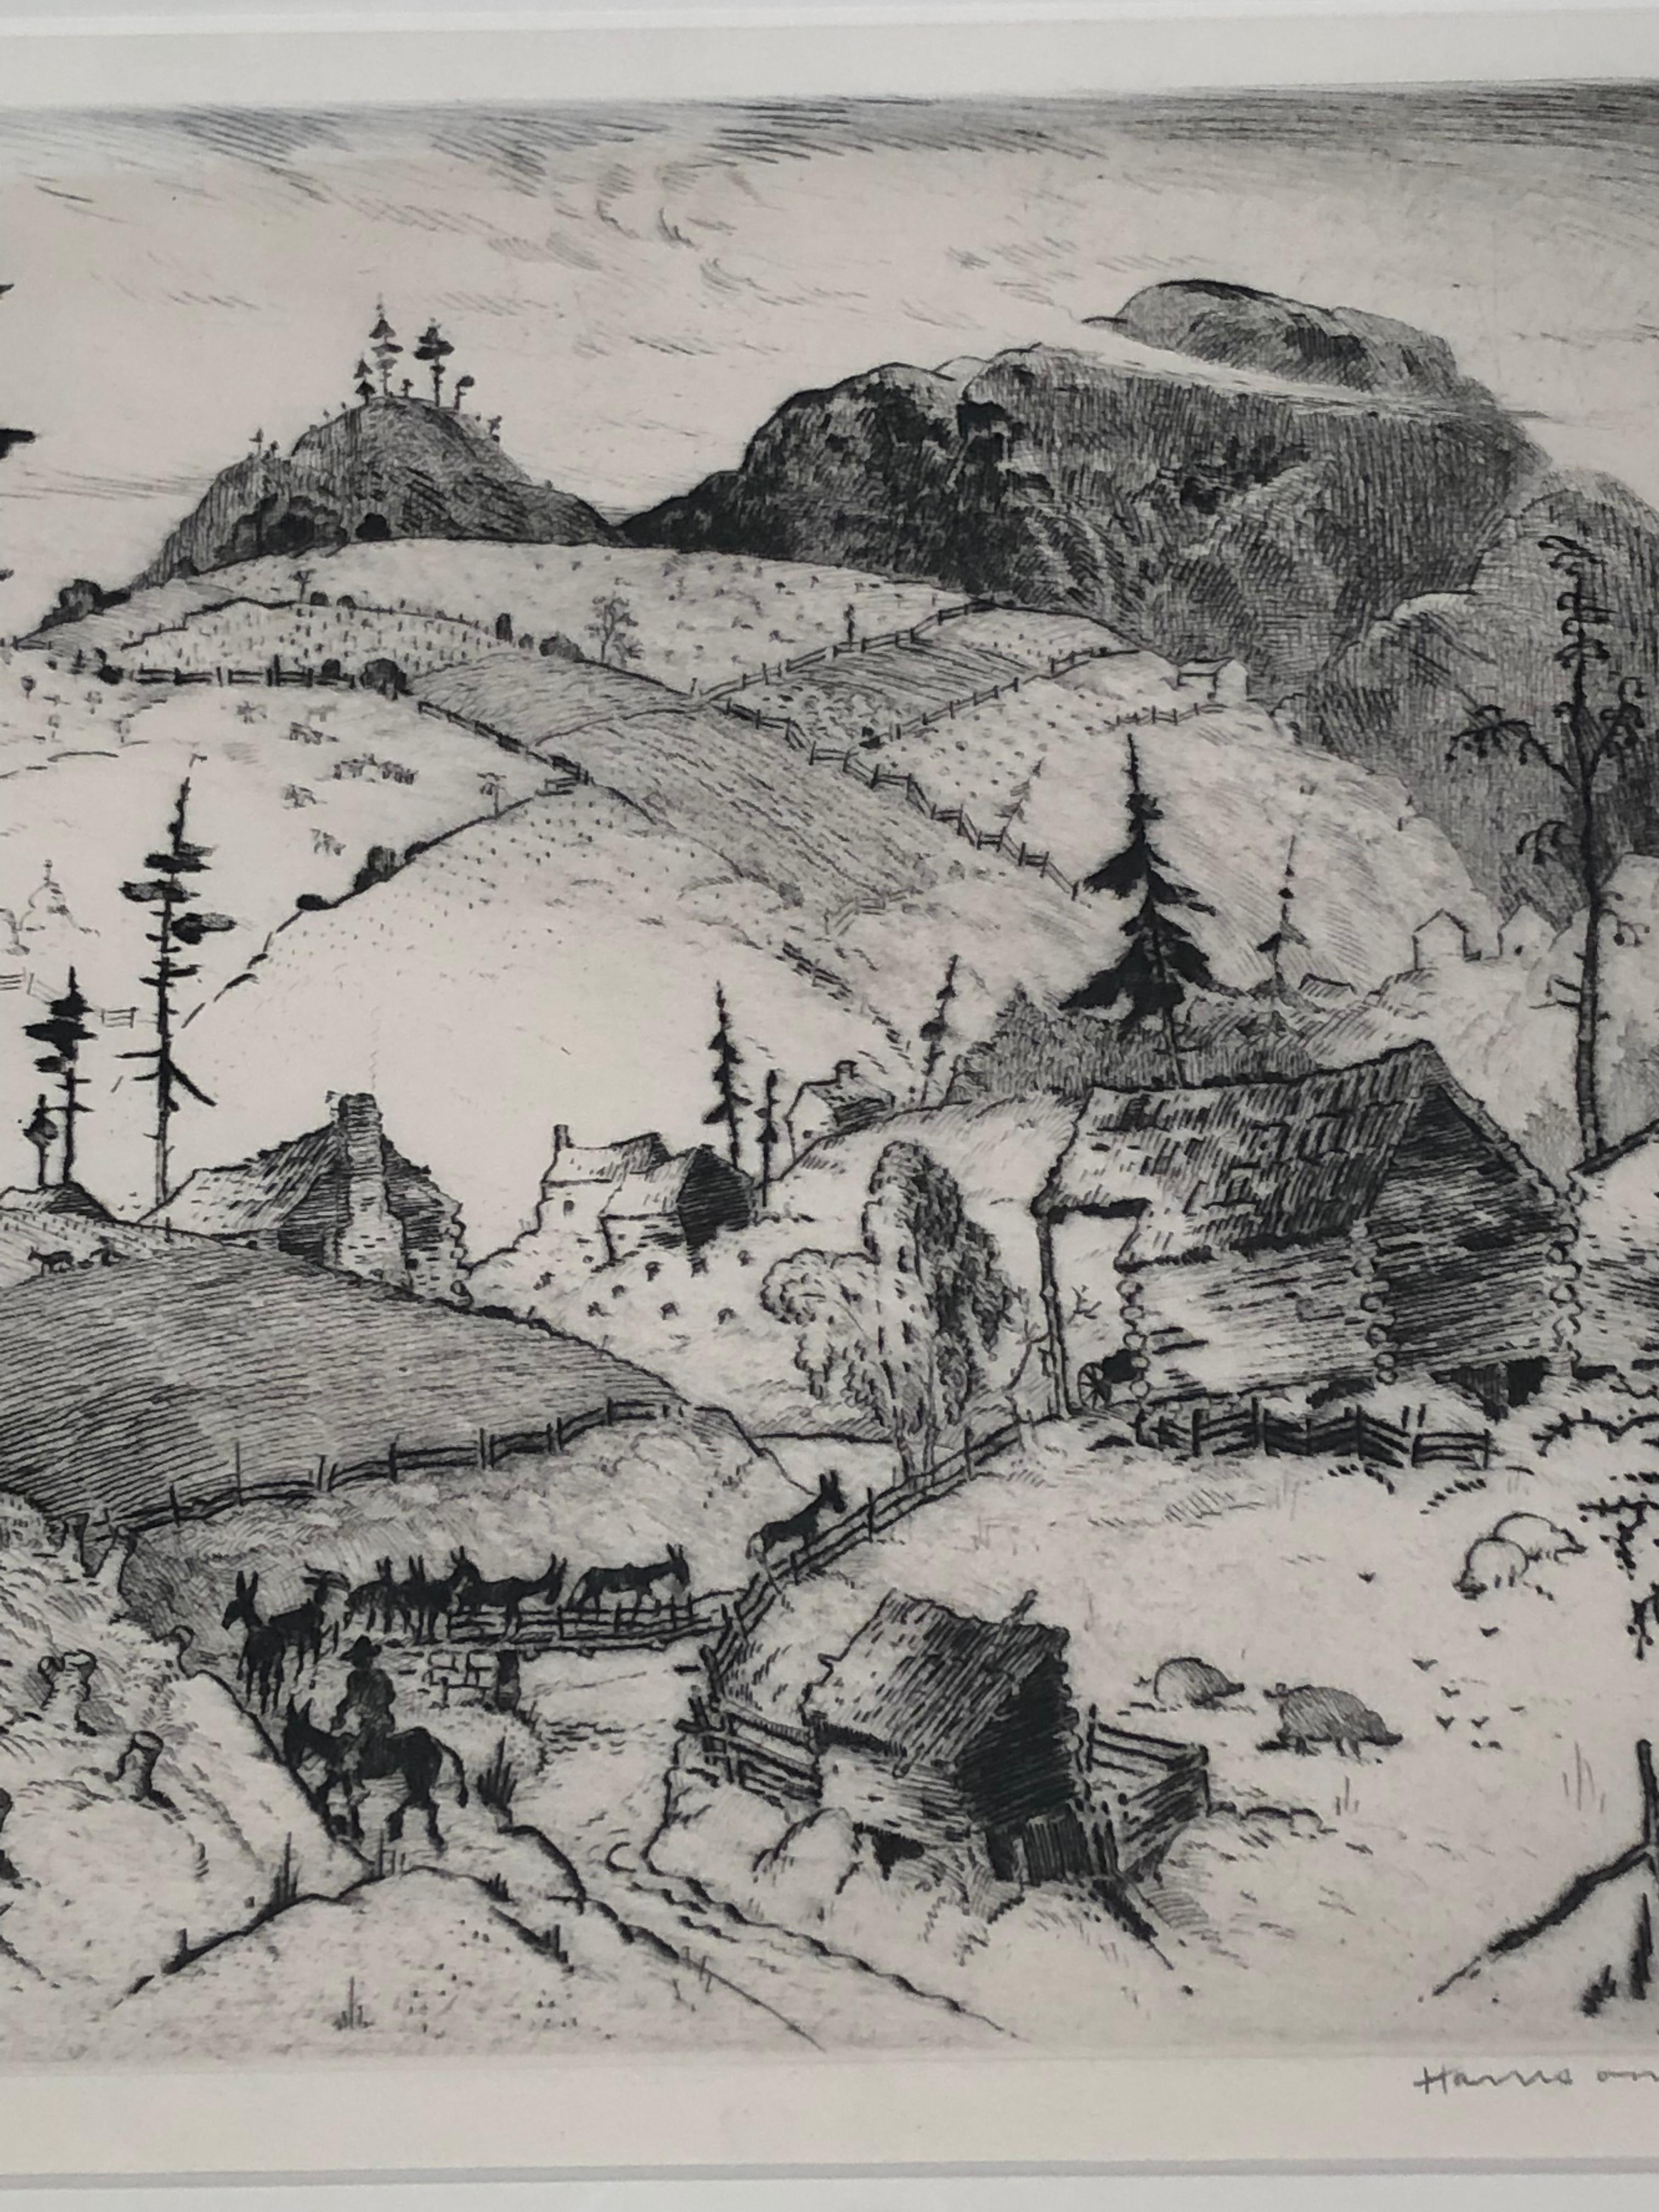 Etched Harrison Cady Etching of Mountain Farms near Spruce Pine, North Carolina